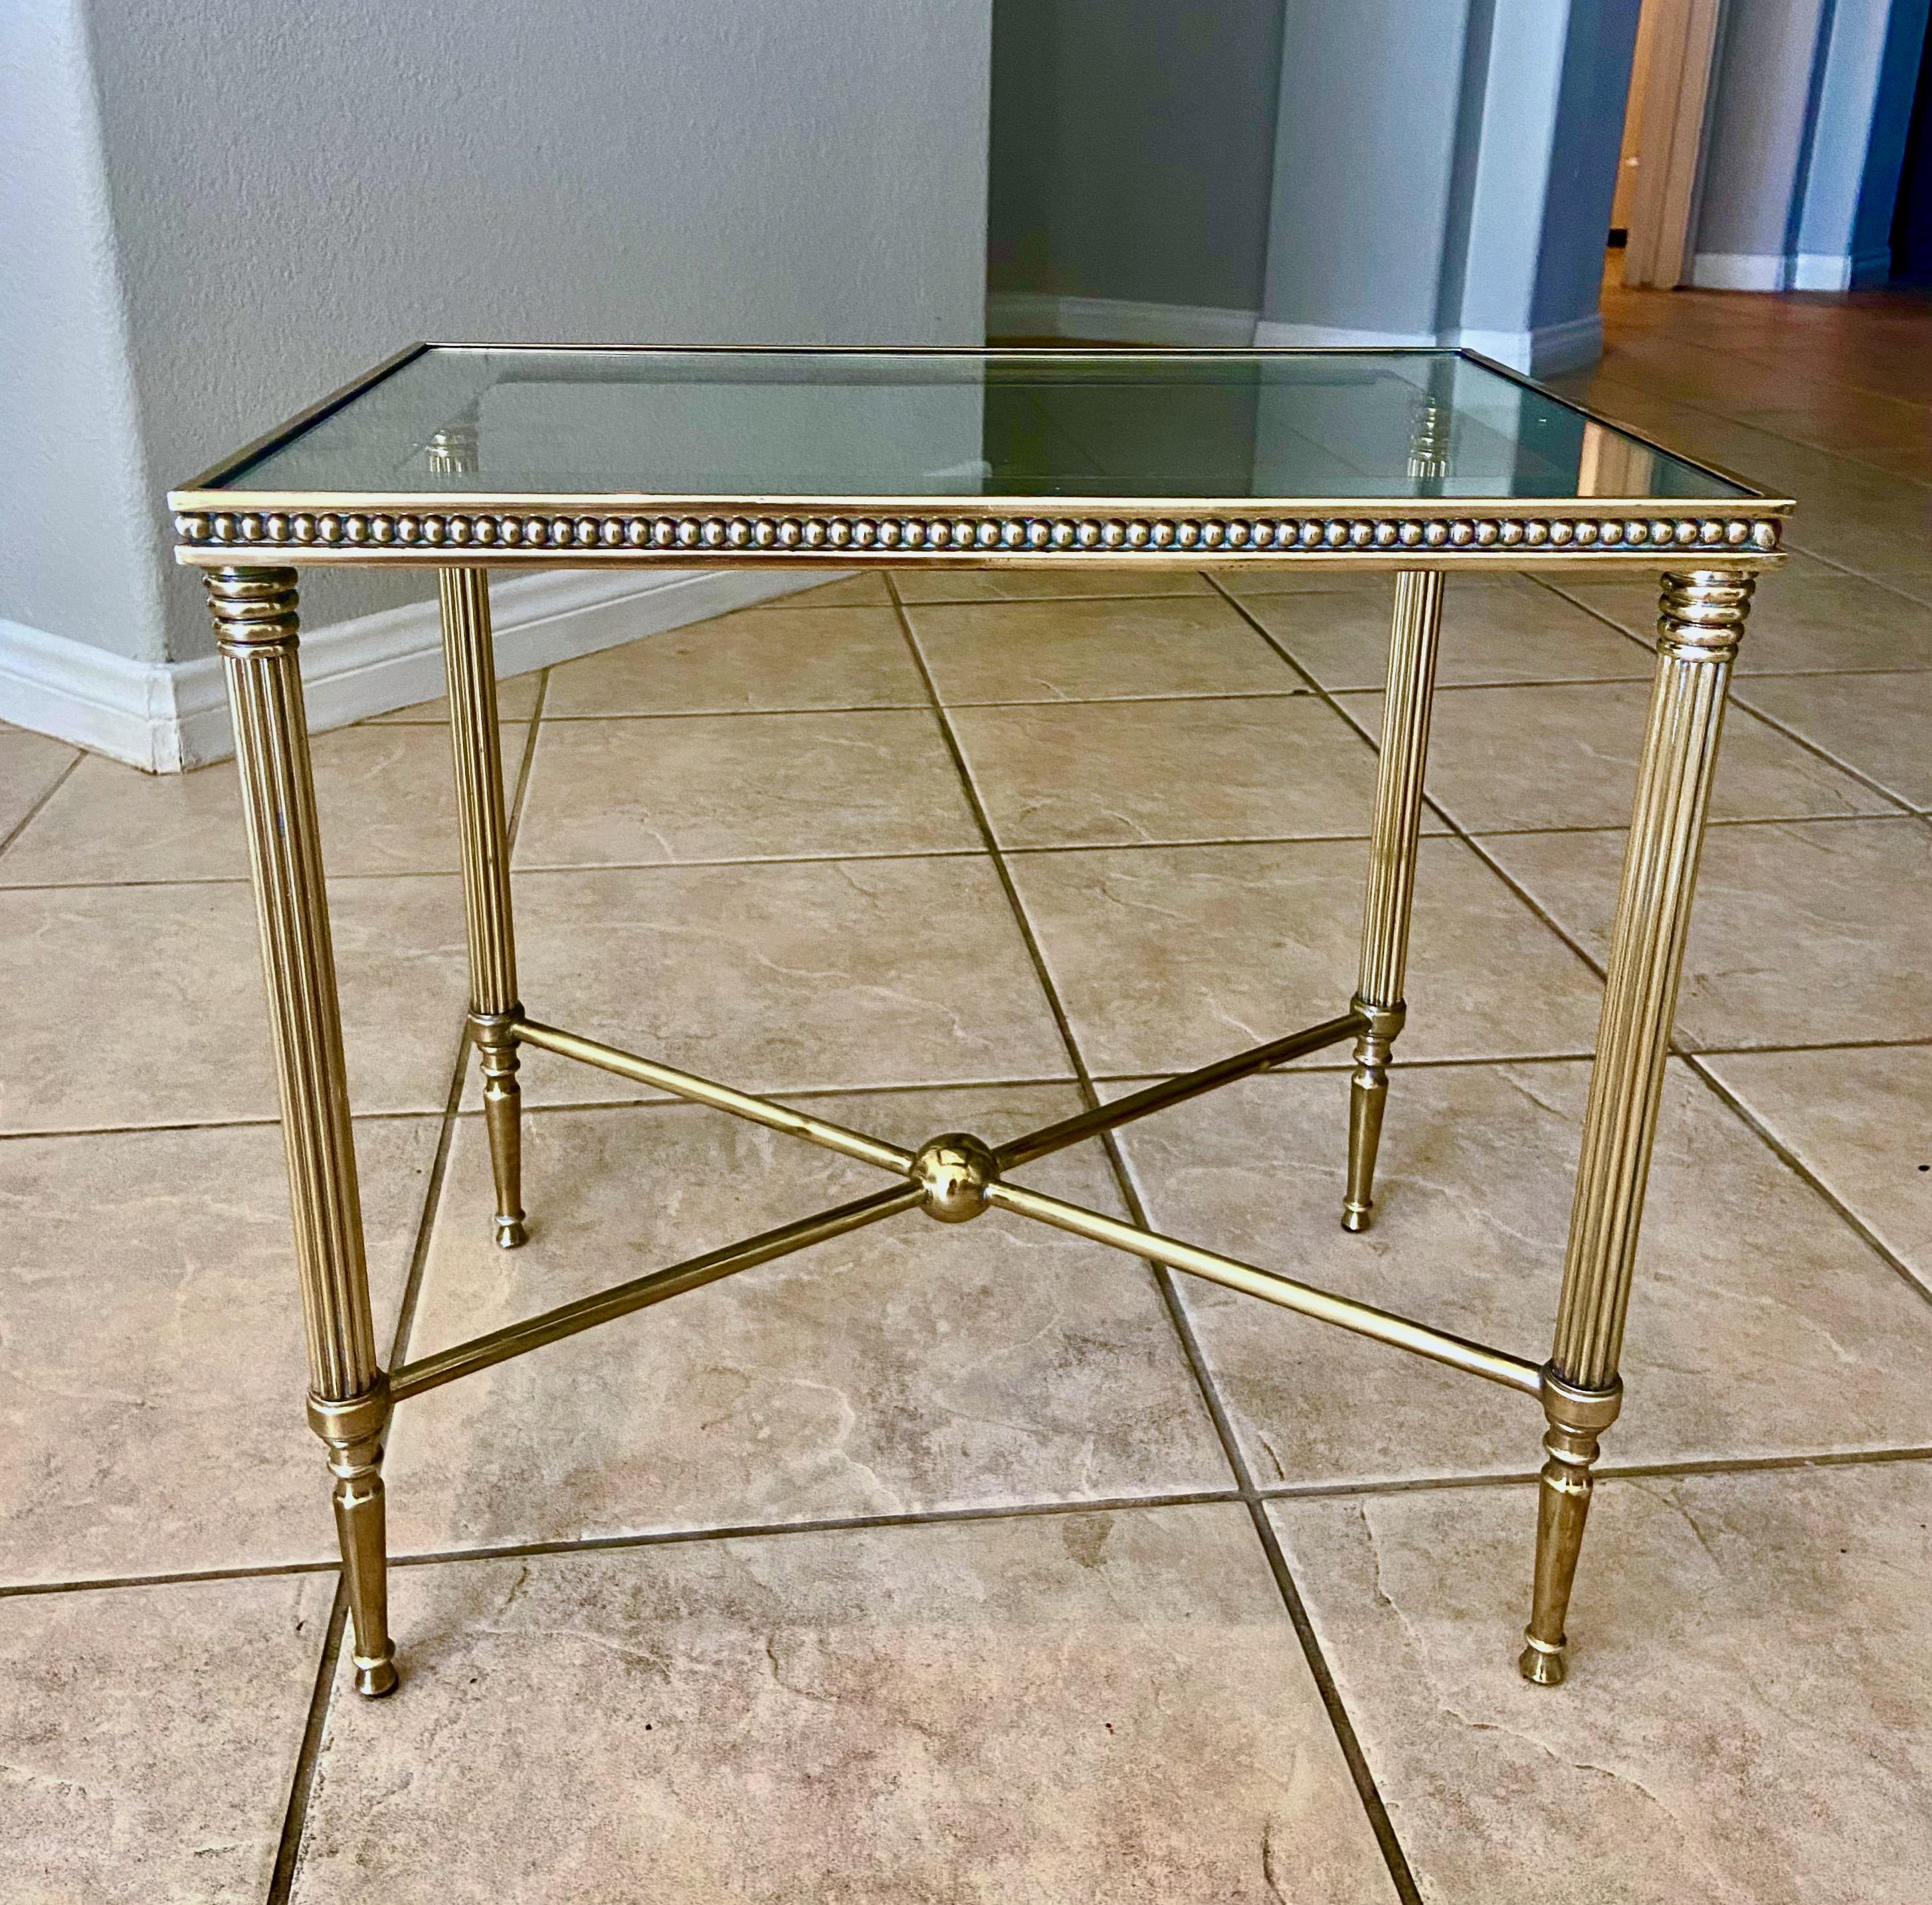 Smaller scale brass side table with x-base stretcher, reeded legs and mirrored edge inset top.